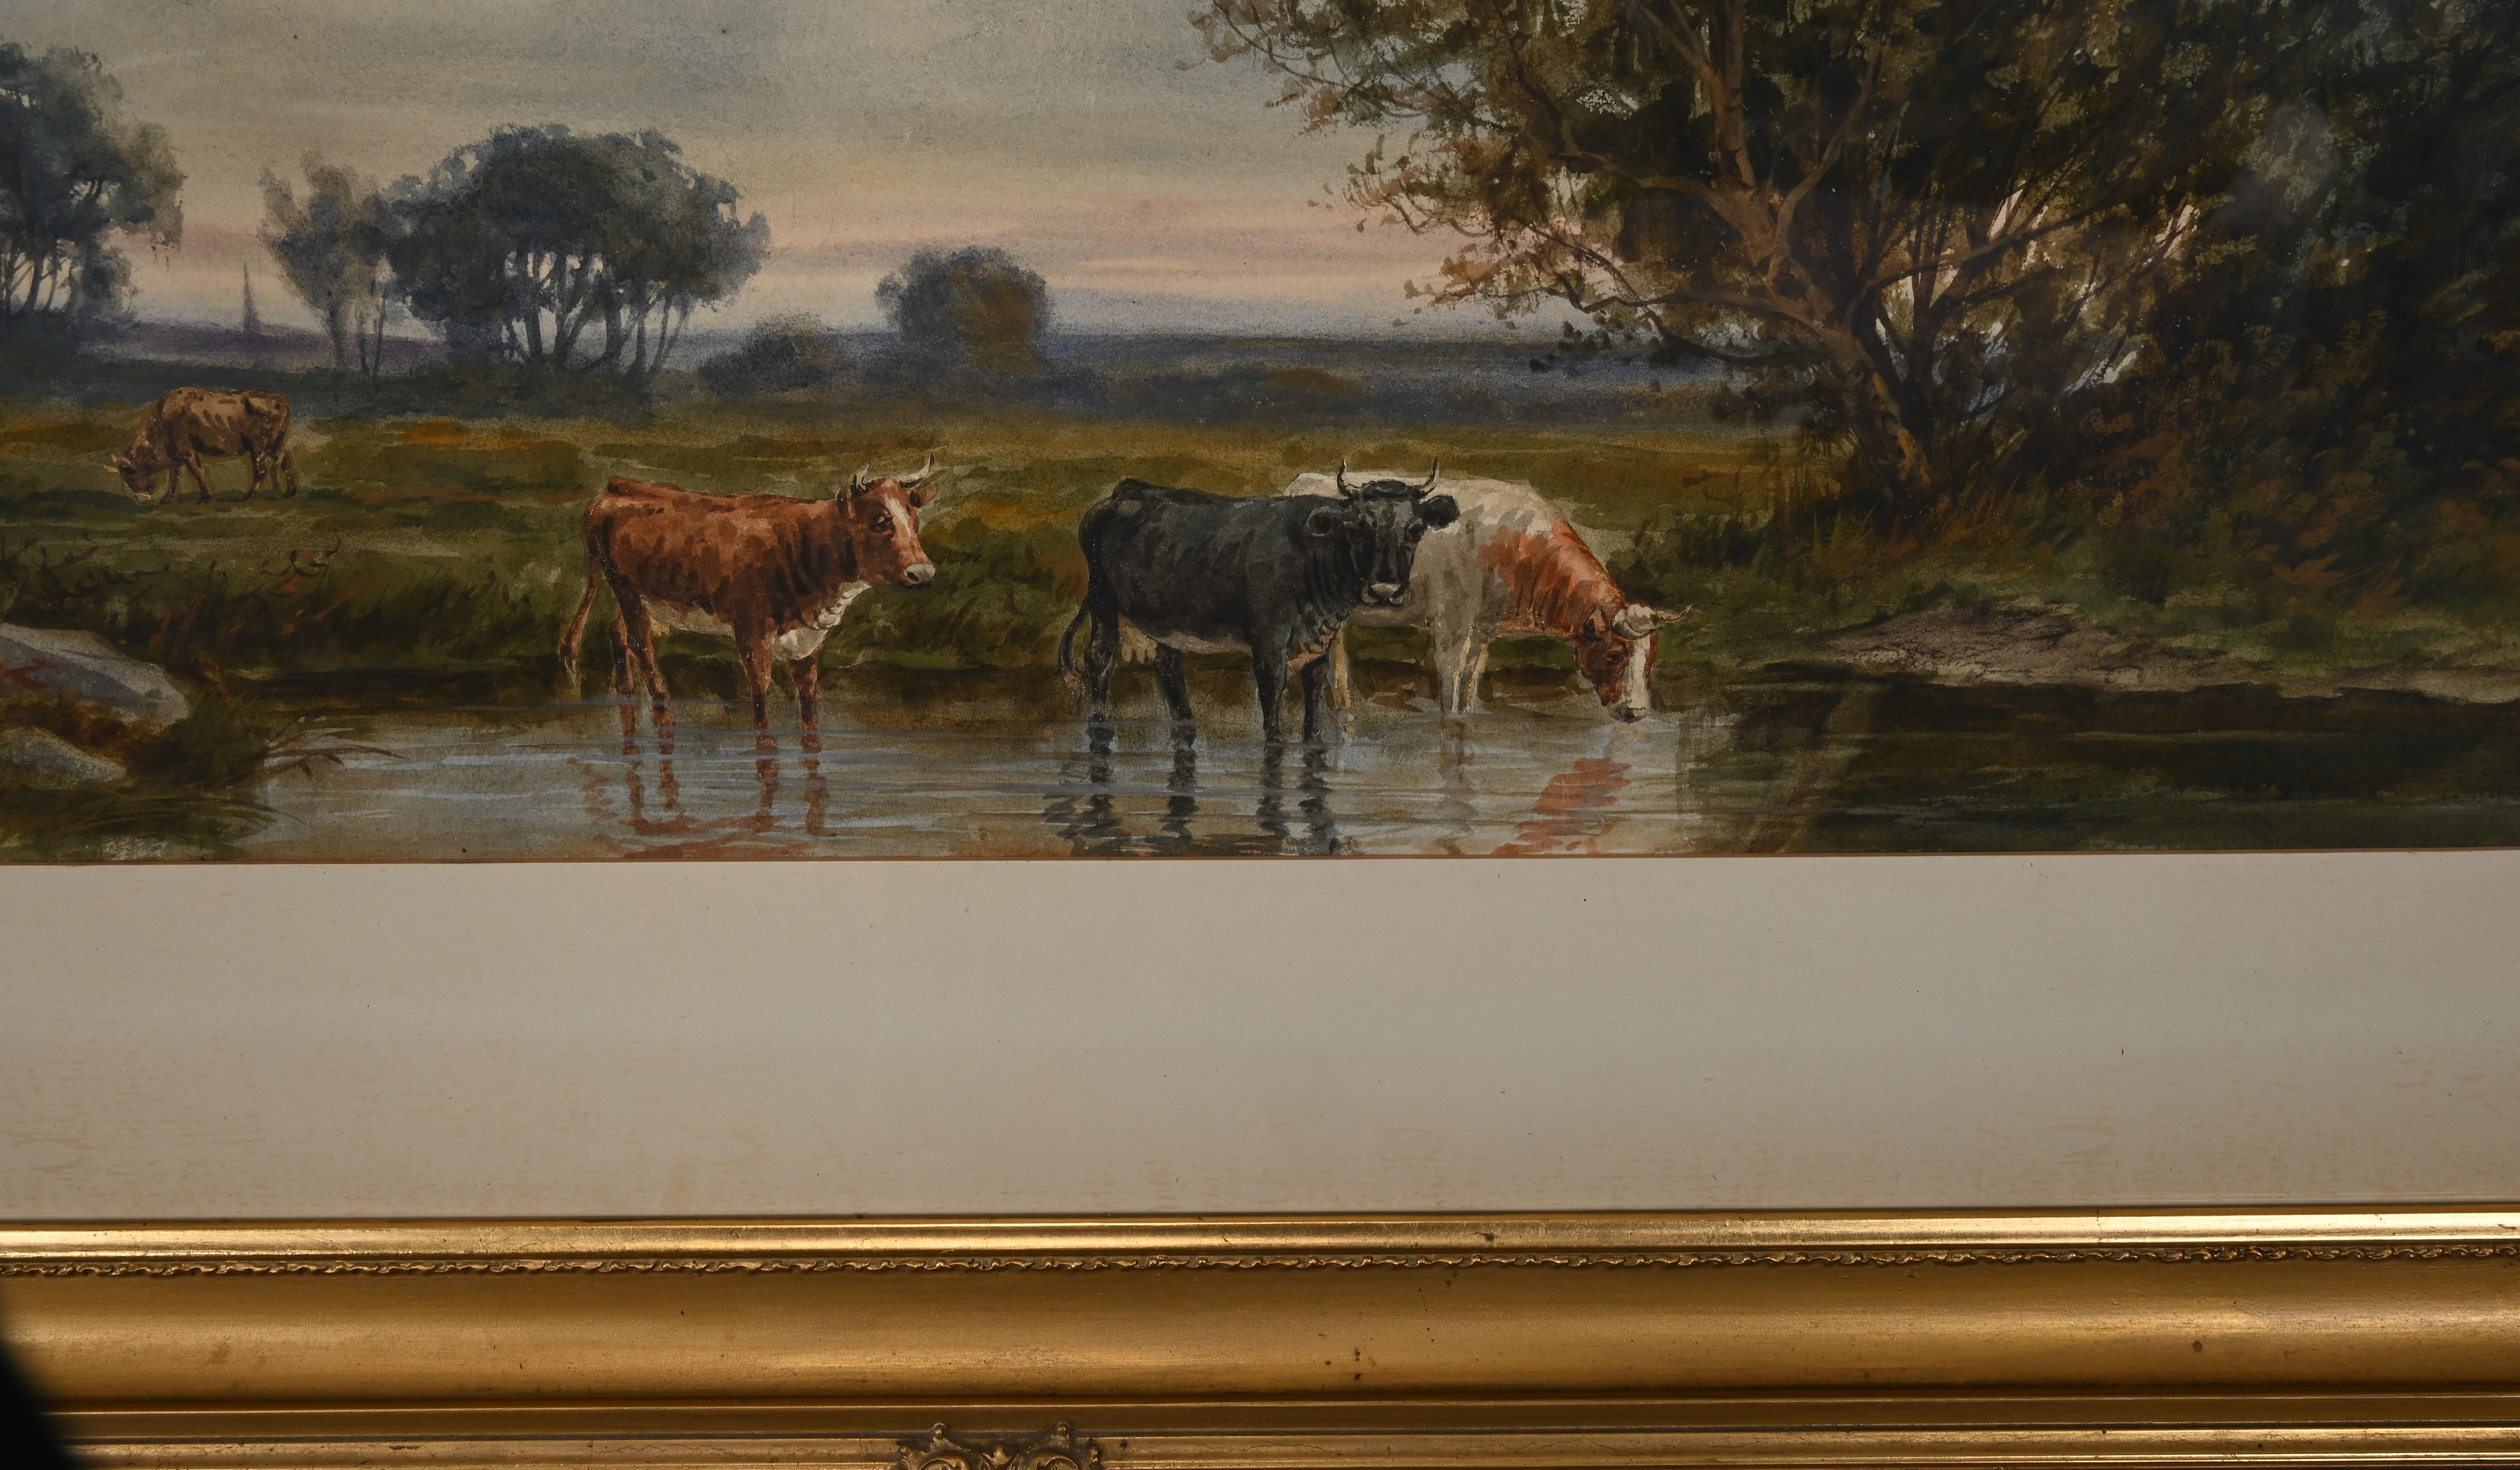 Watercolor Painting of a Landscape with Cattle Watering by A. Matthews 1